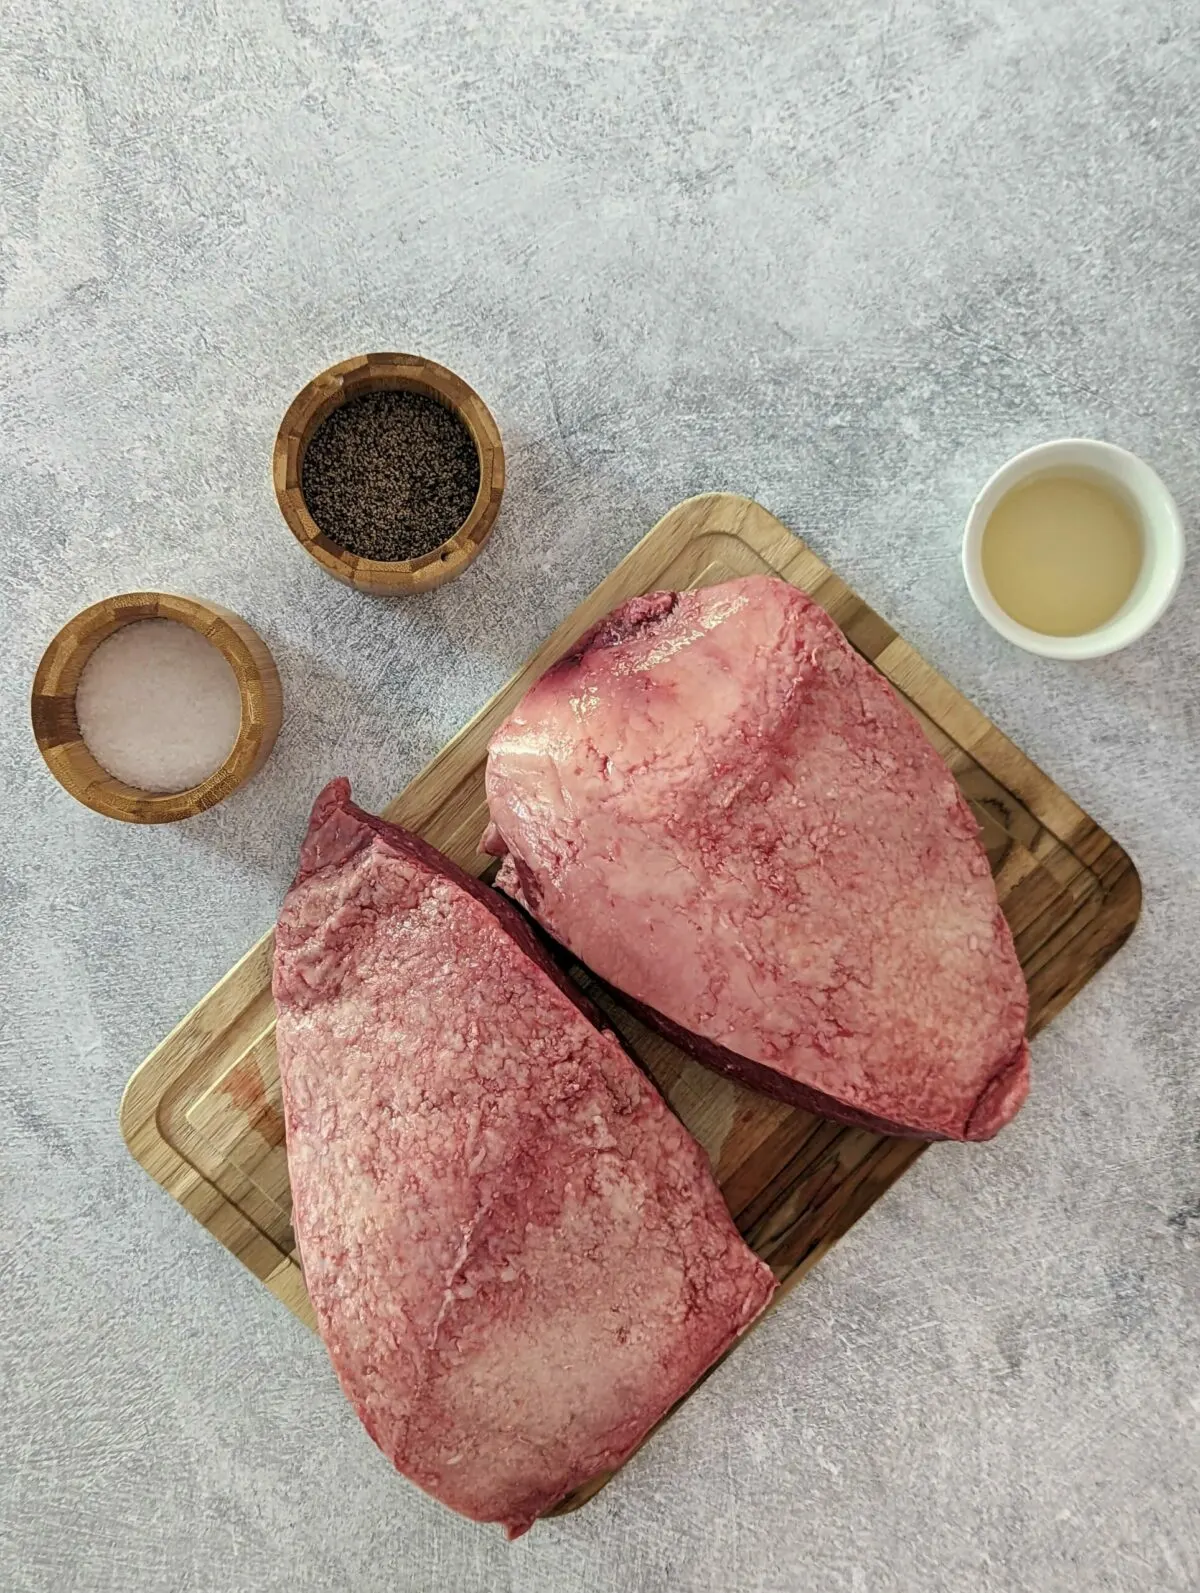 A image showing the ingredients for grilled picanha.